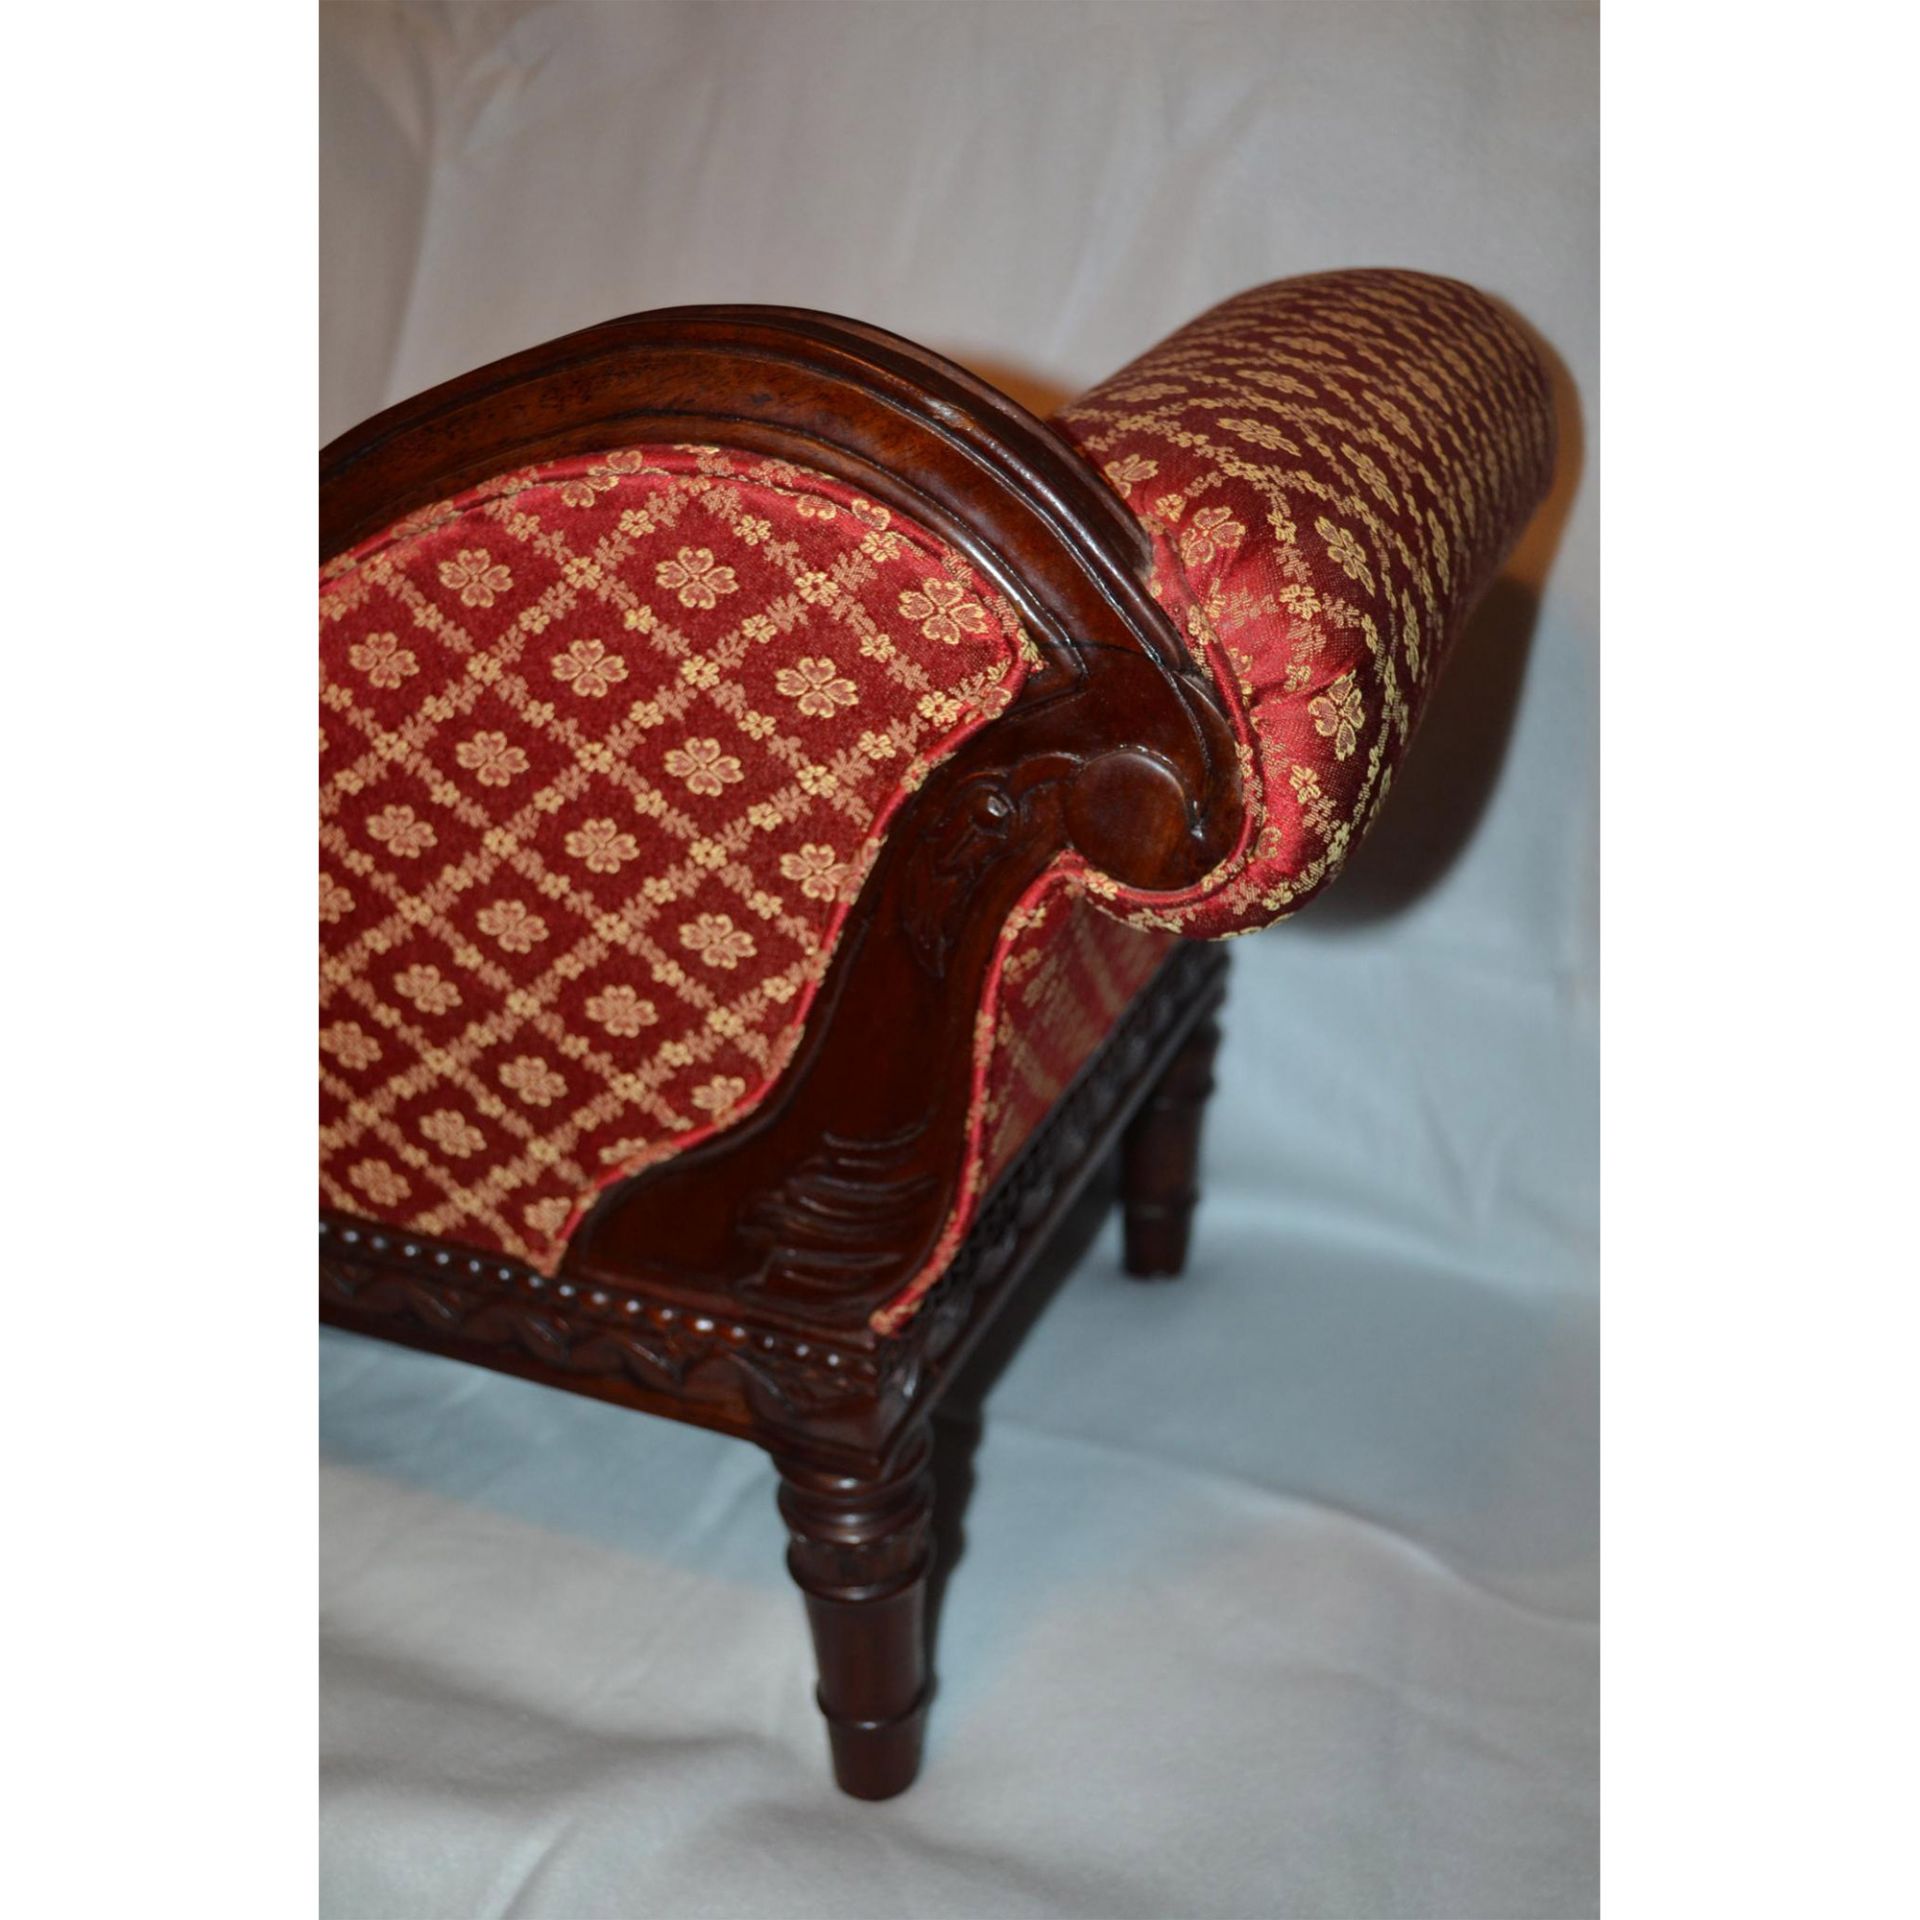 Miniature European Mahogany Hand Carved And Crafted Swan Sofa, Upholstered In Red/Gold Pattern Damas - Bild 5 aus 5